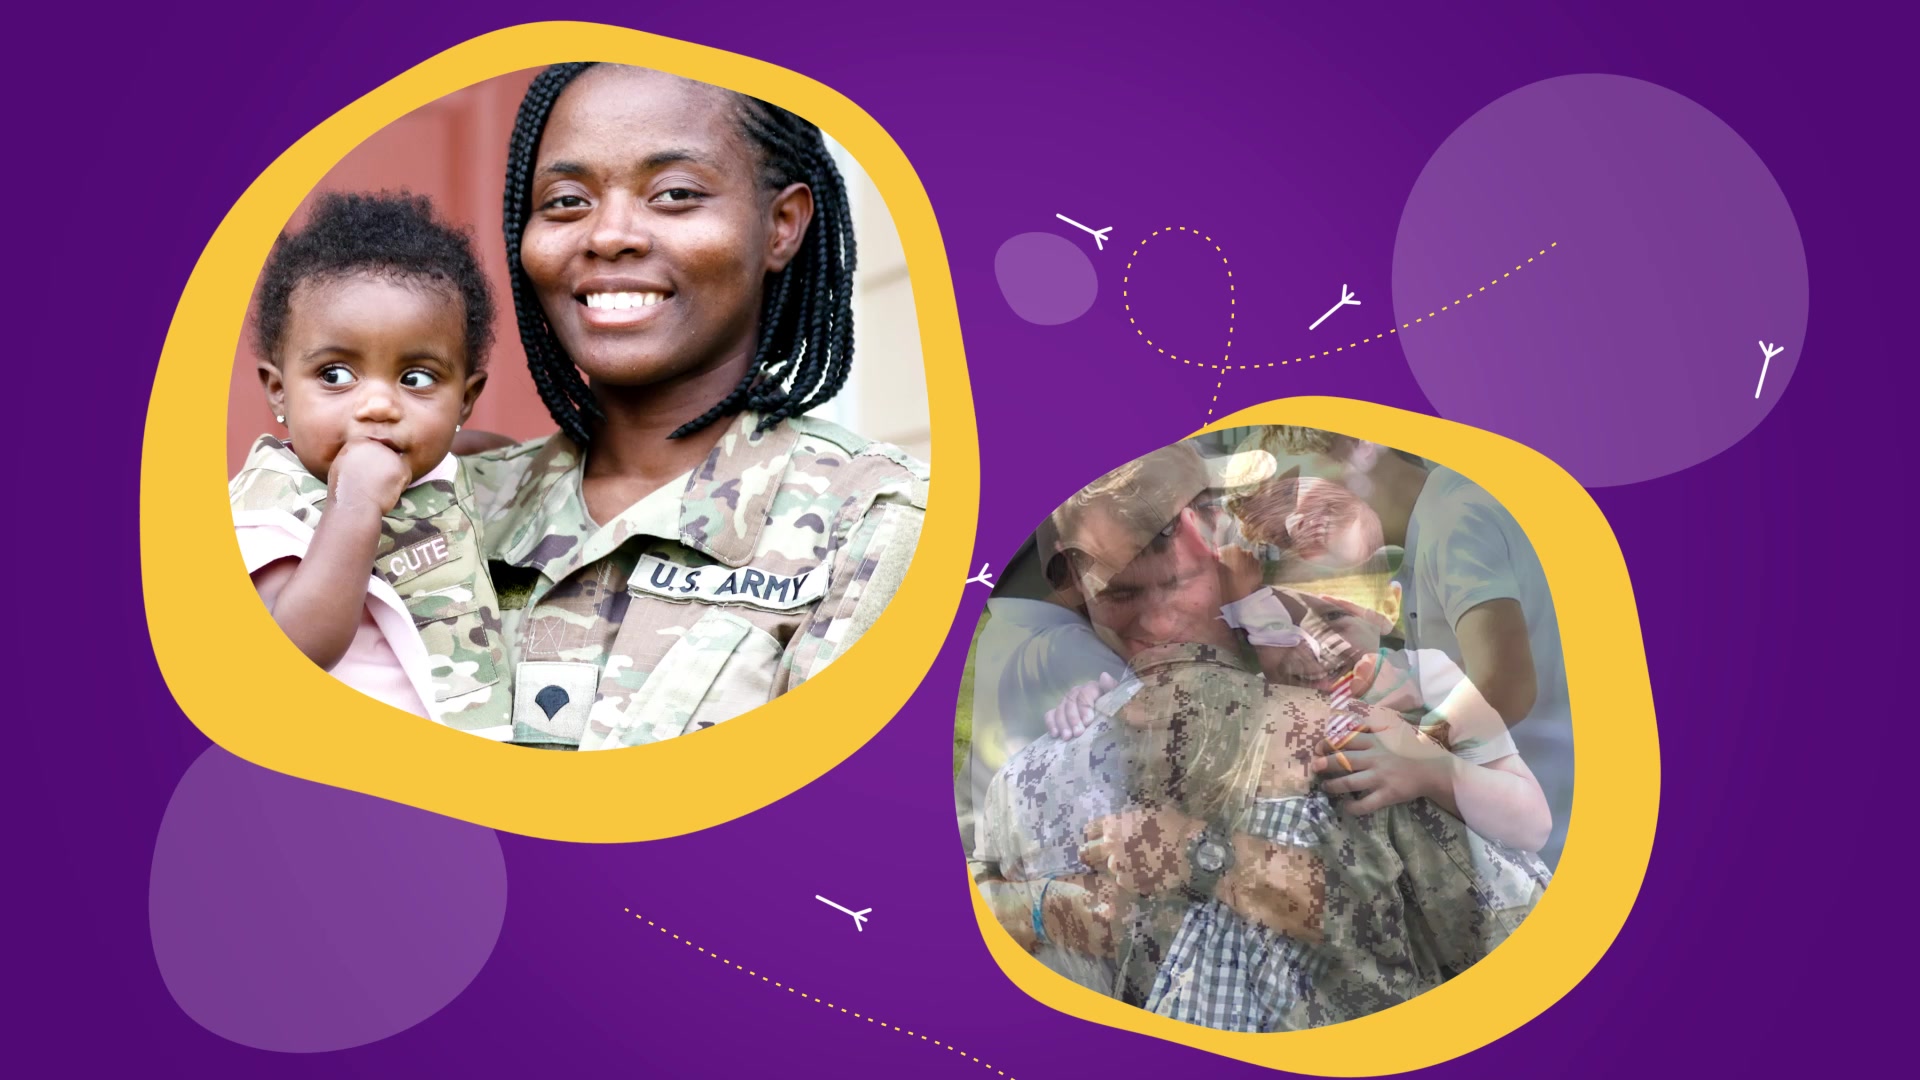 The Exchange celebrates April, the Month of the Military Child!
Join the Exchange as we recognize and celebrate our youngest heroes!